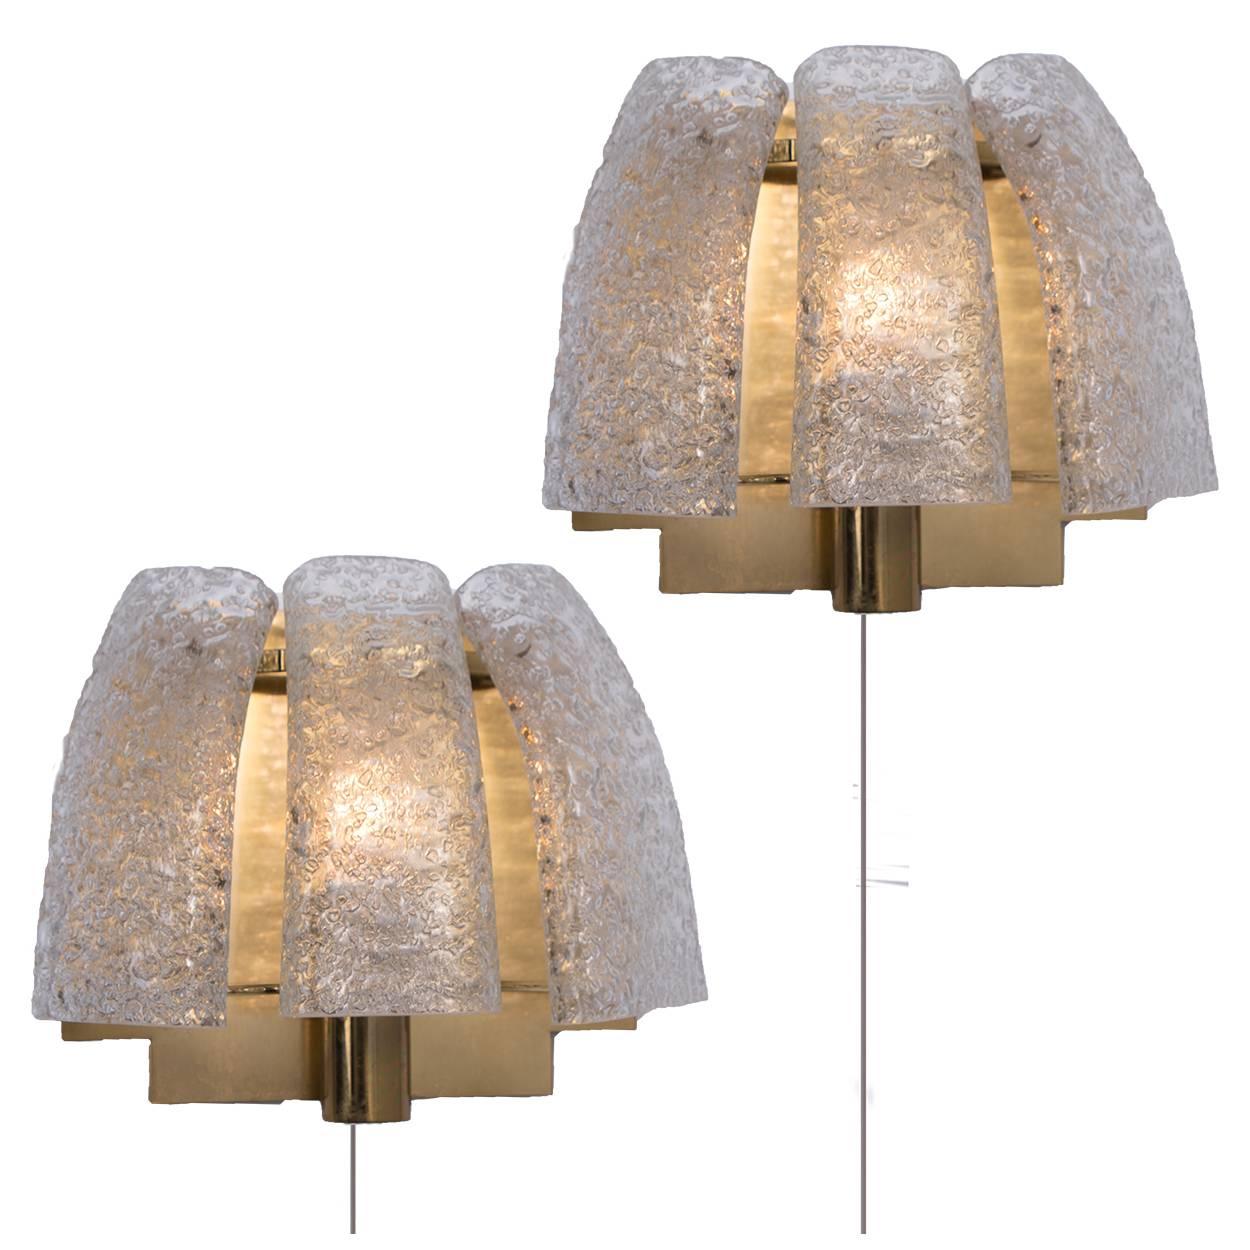 We offer a set of high-end Doria light fixtures. The set is executed to a high standard. Beautiful craftsmanship.

The art glass has pattern in it, what gives a nice diffuse light effect and a nice pattern on ceiling, walls and floor.

The